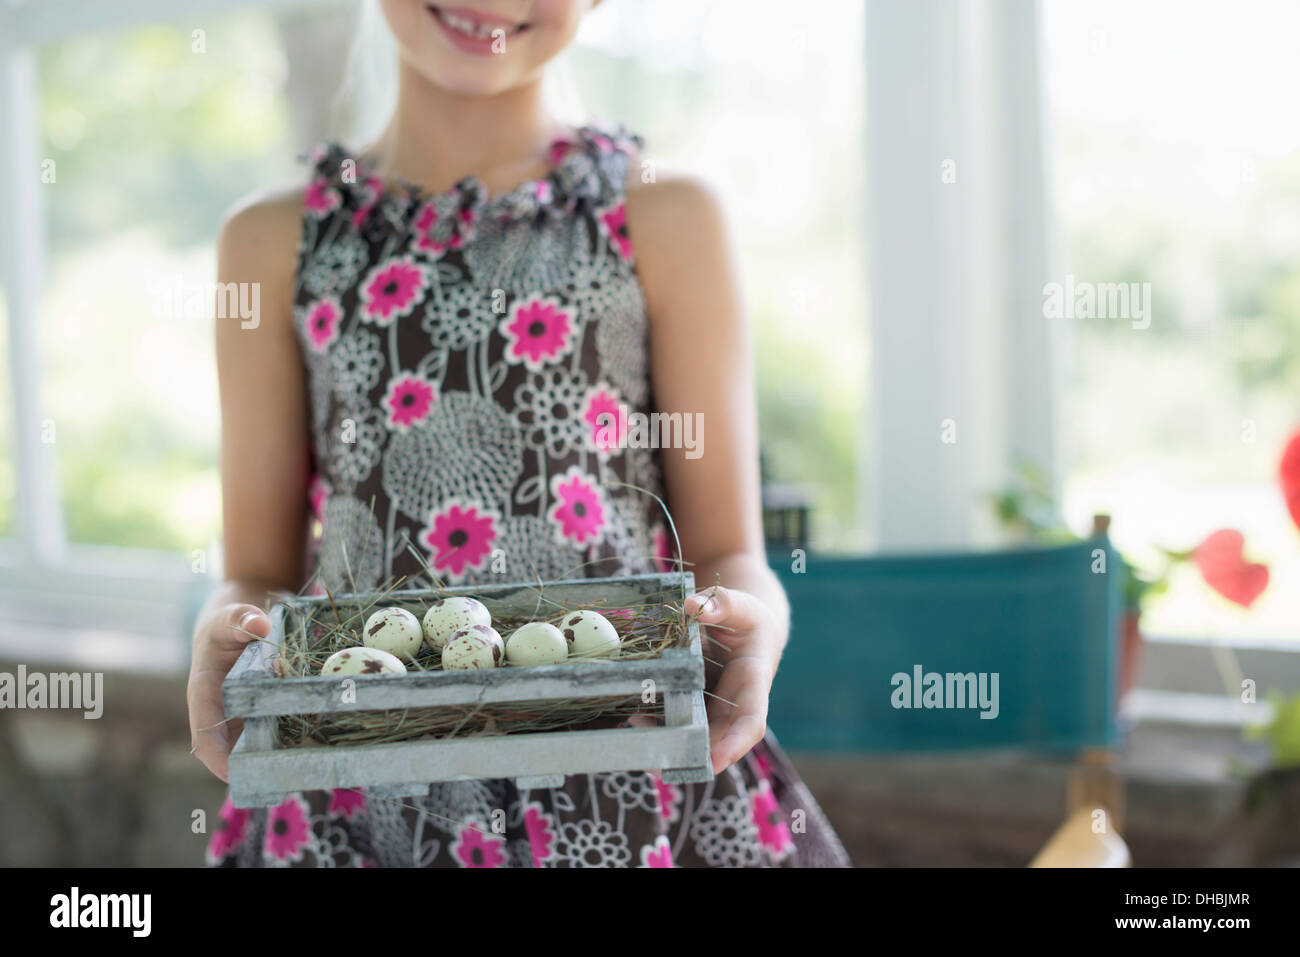 A young girl in a floral dress, examining a clutch of speckled bird eggs in a box. Stock Photo